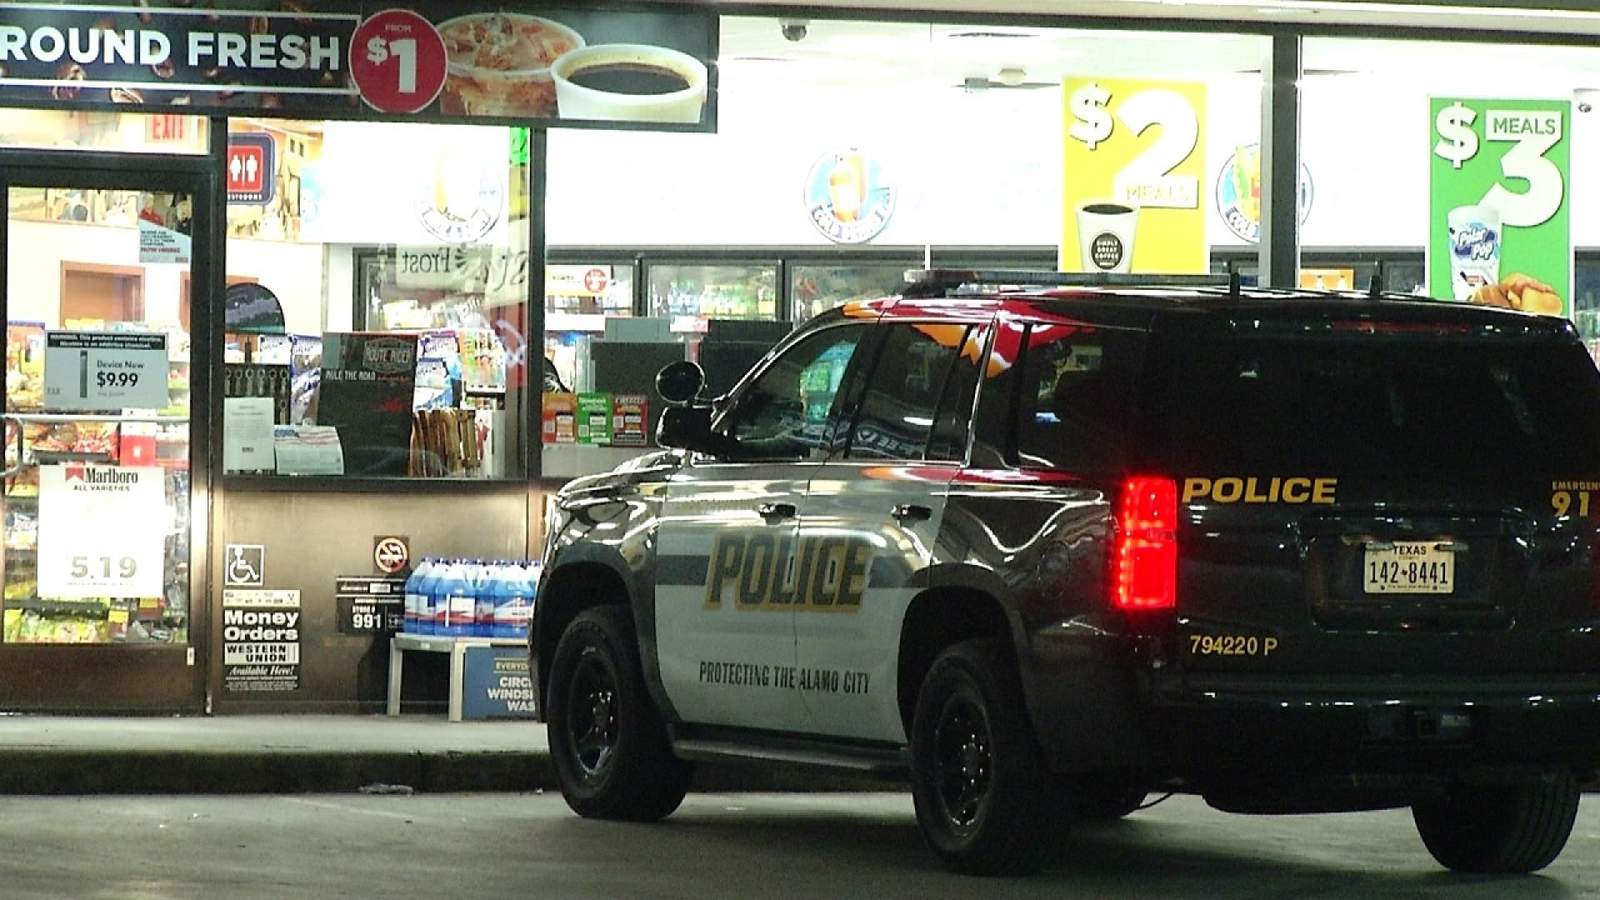 Men with handgun steal beer from West Side convenience store, police say